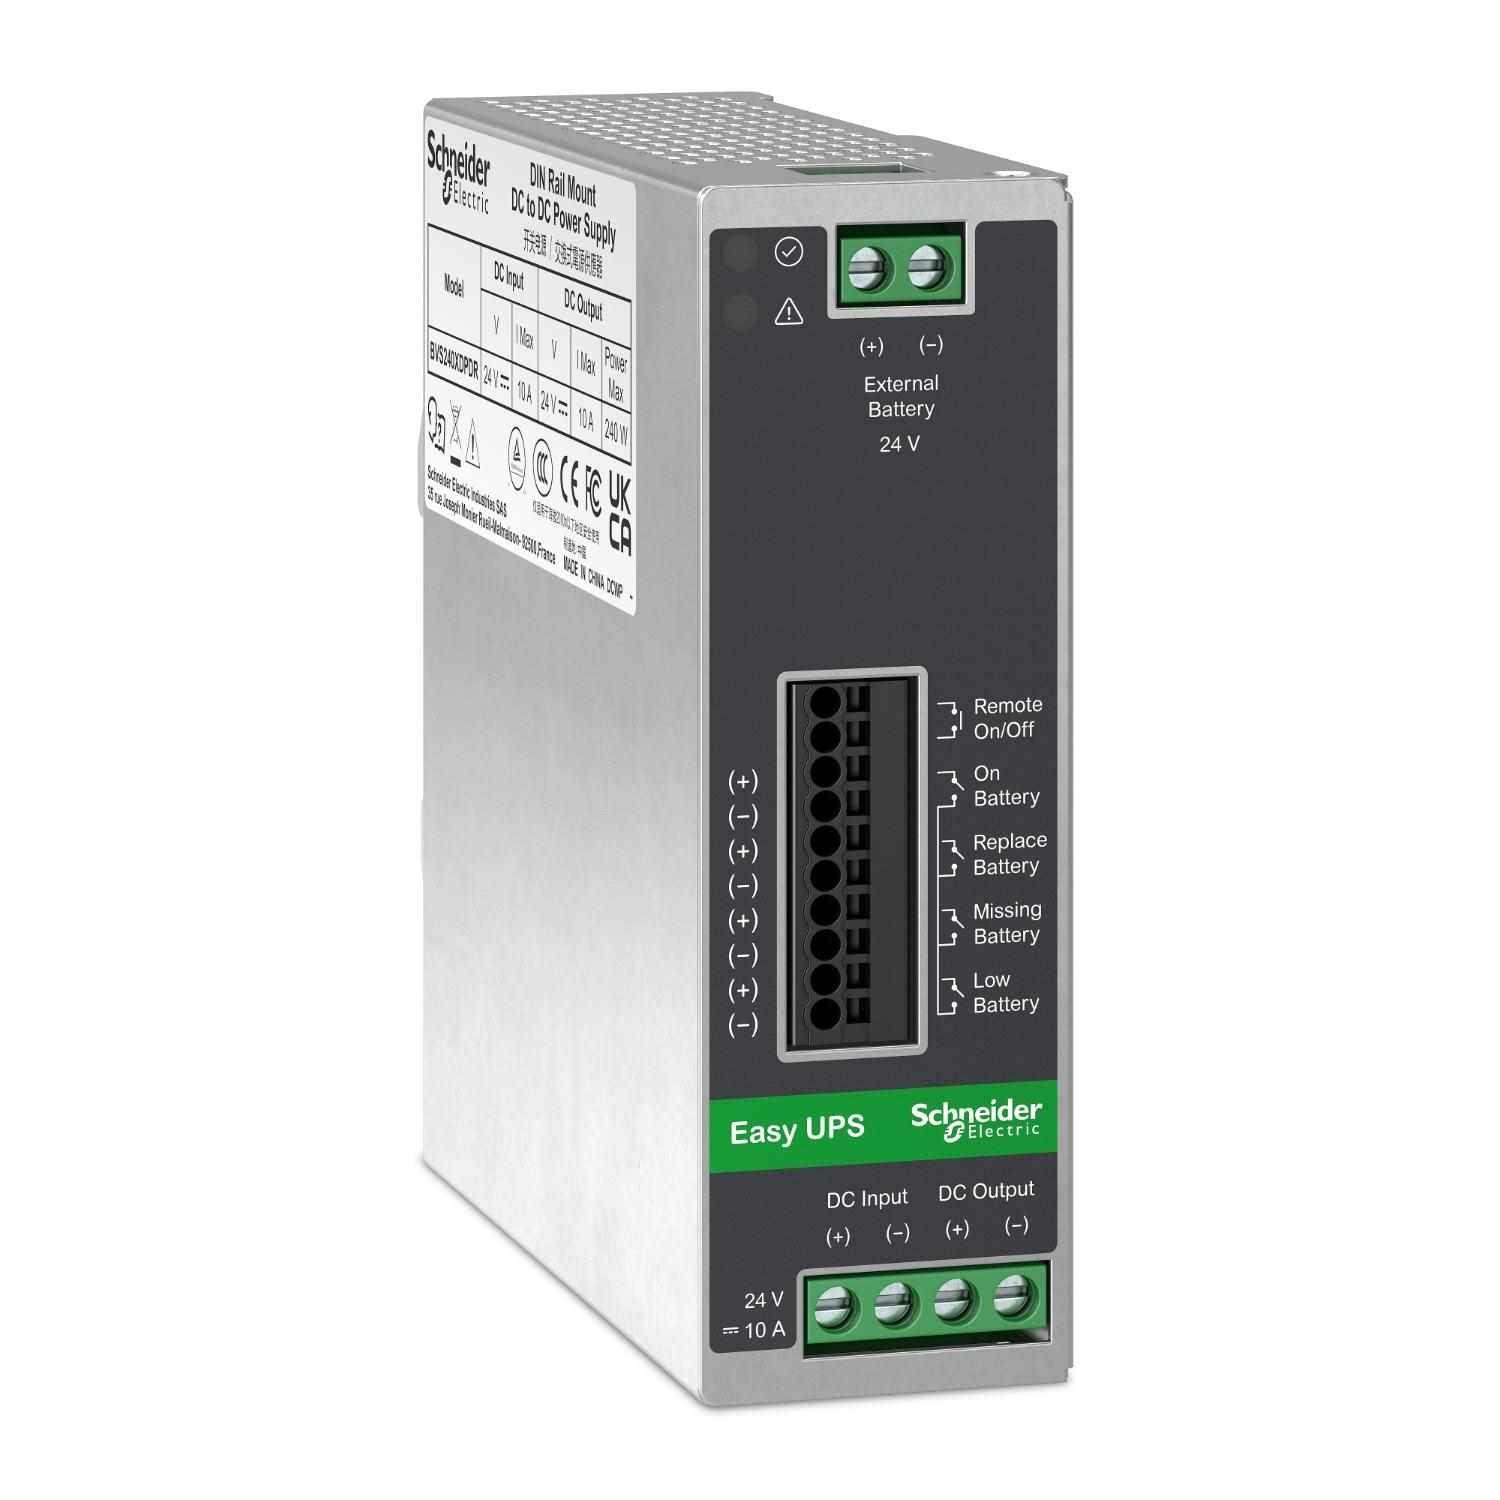 APC EASY UPS Din Rail Mount Switch Power Supply Battery Back Up 24V DC 10 A,  240W1 